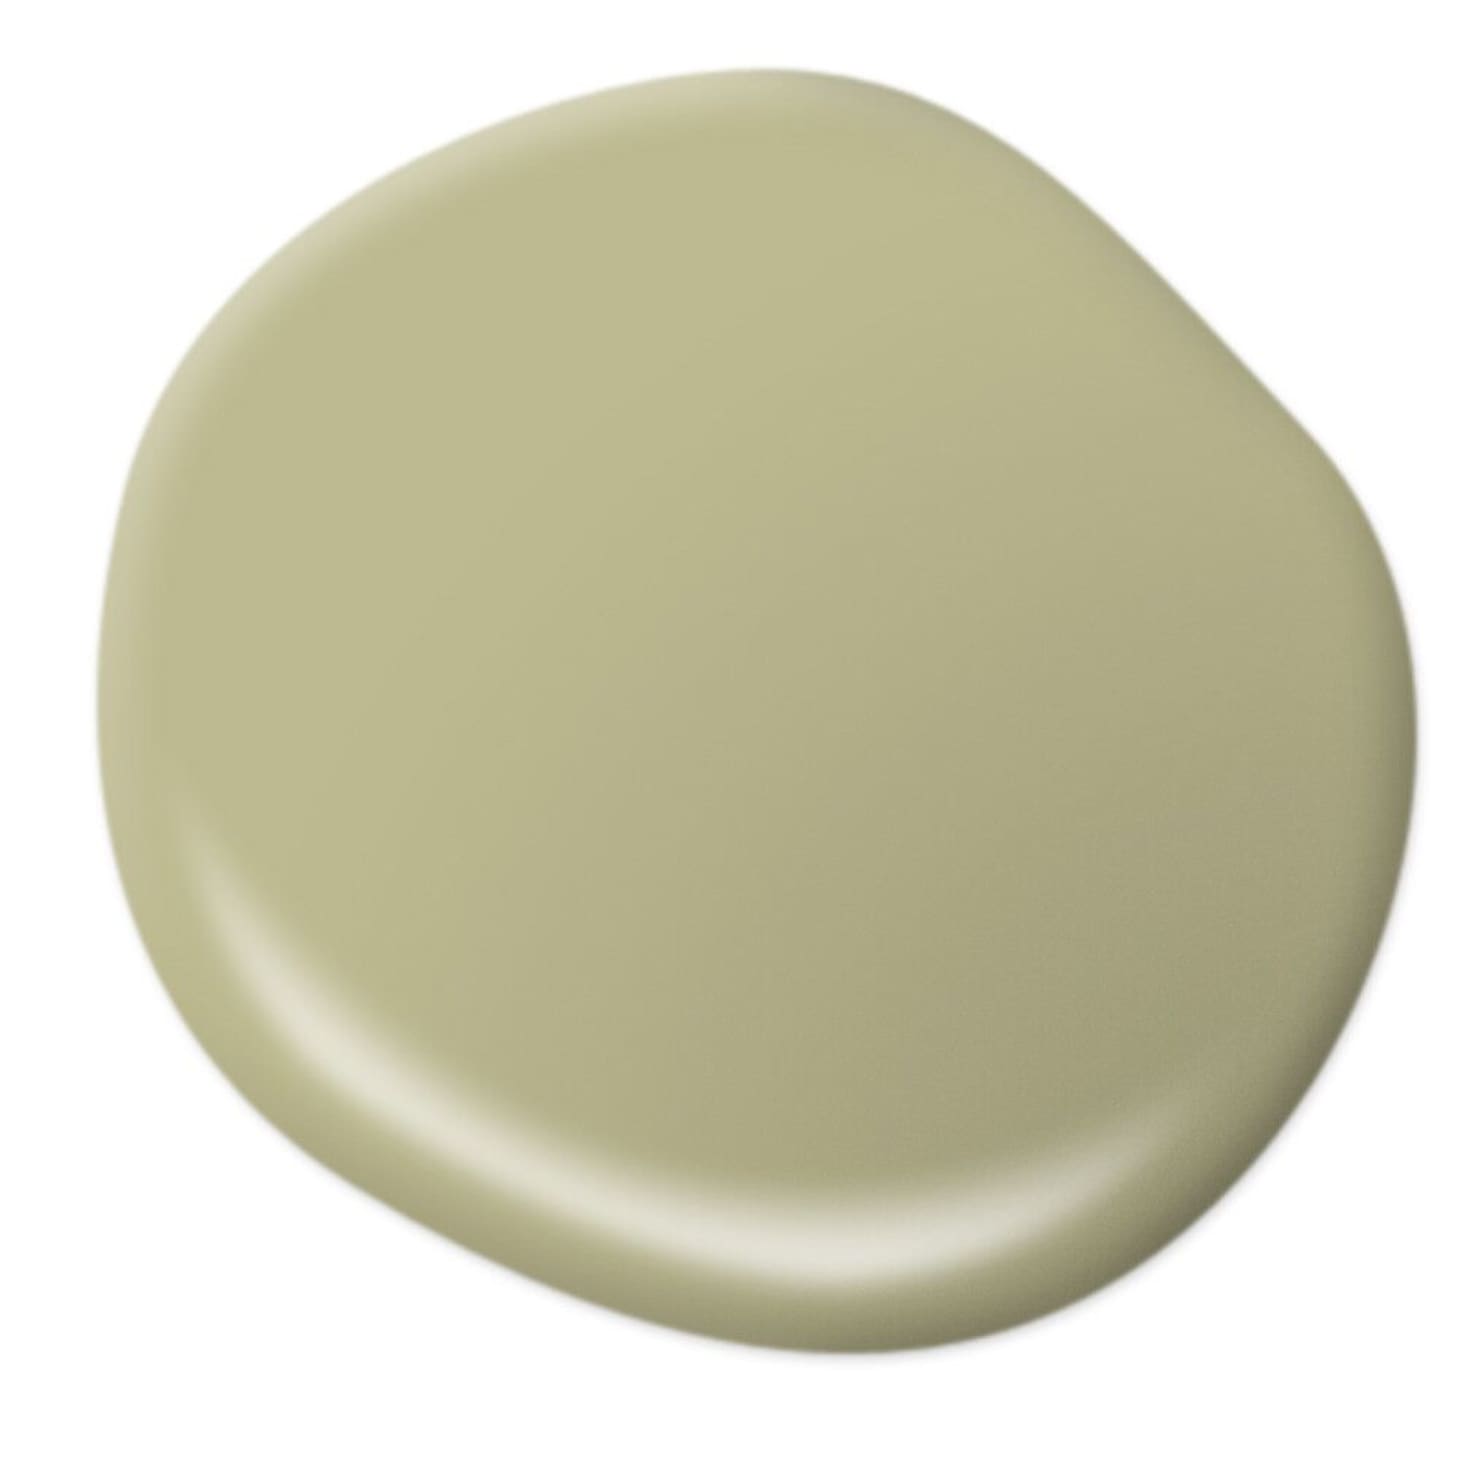 This is Behr's 2020 Color of the Year Apartment Therapy